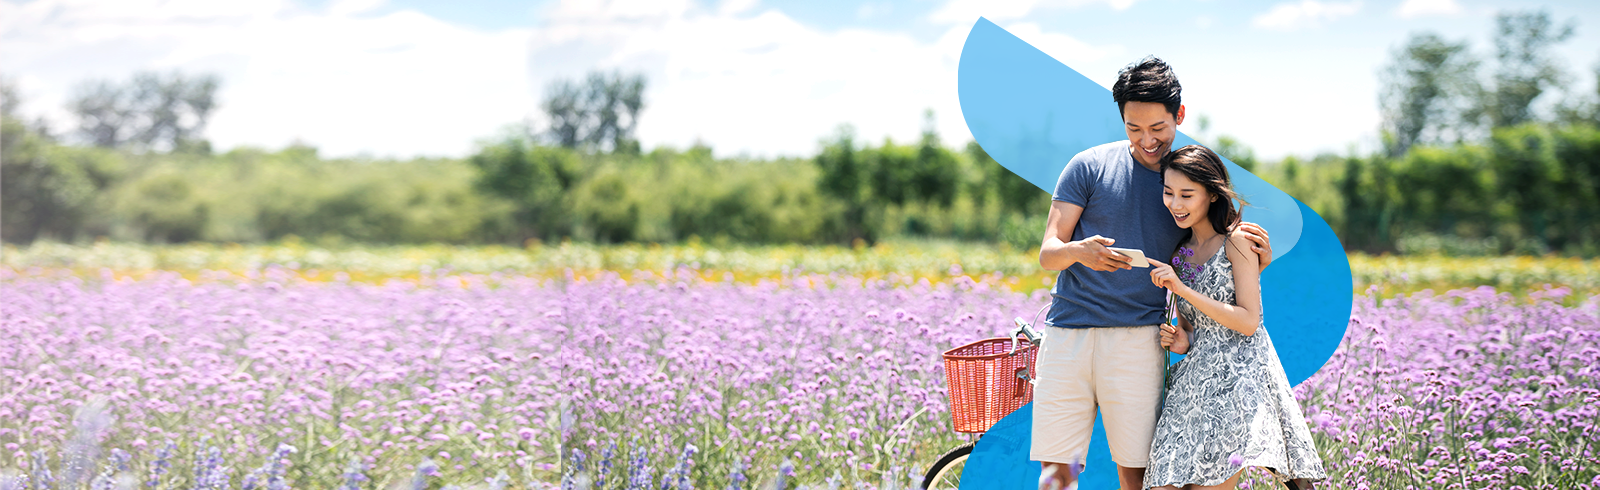 Go on a sensational Spring spectacular with your Standard Chartered credit cards.